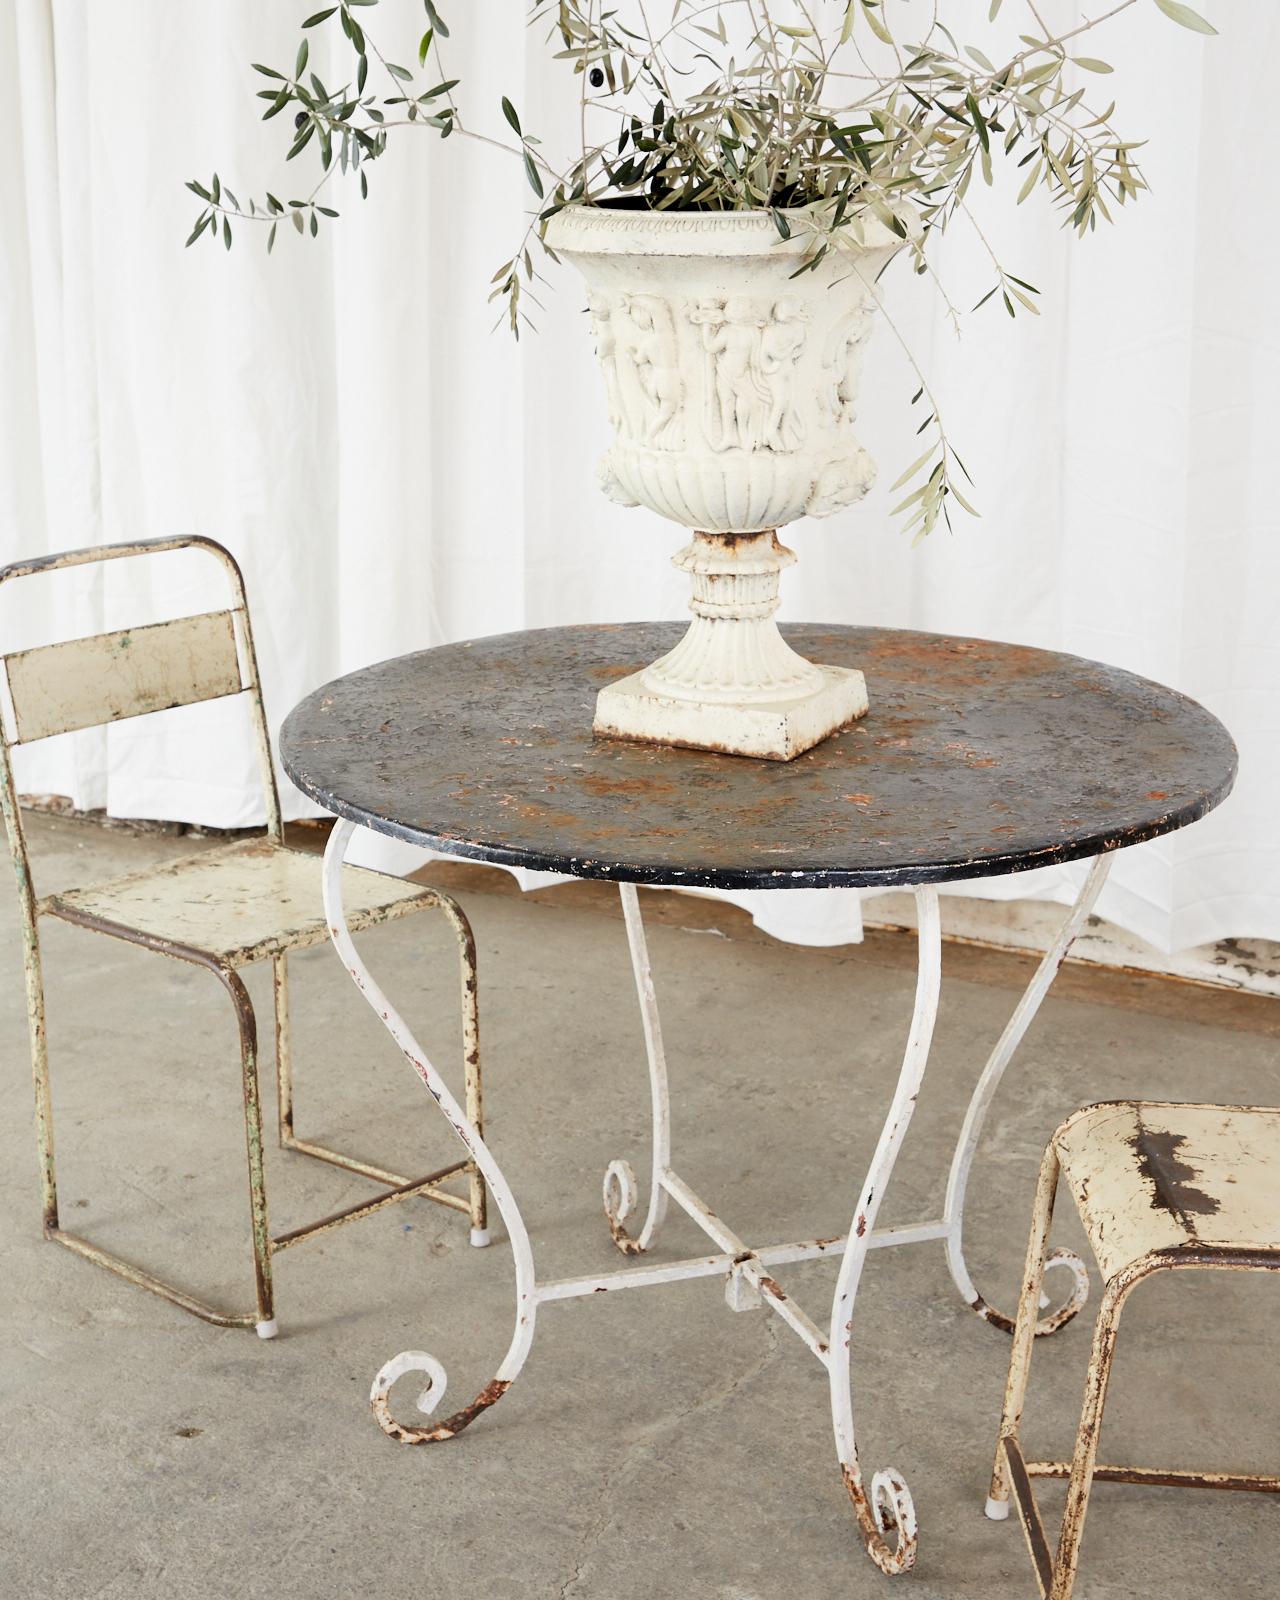 Painted French Art Nouveau period bistro table or garden dining table. The table features a patinated zinc top that is round supported by a scrolled wrought iron base. Full of character and charm with an aged finish on the painted surfaces. There is